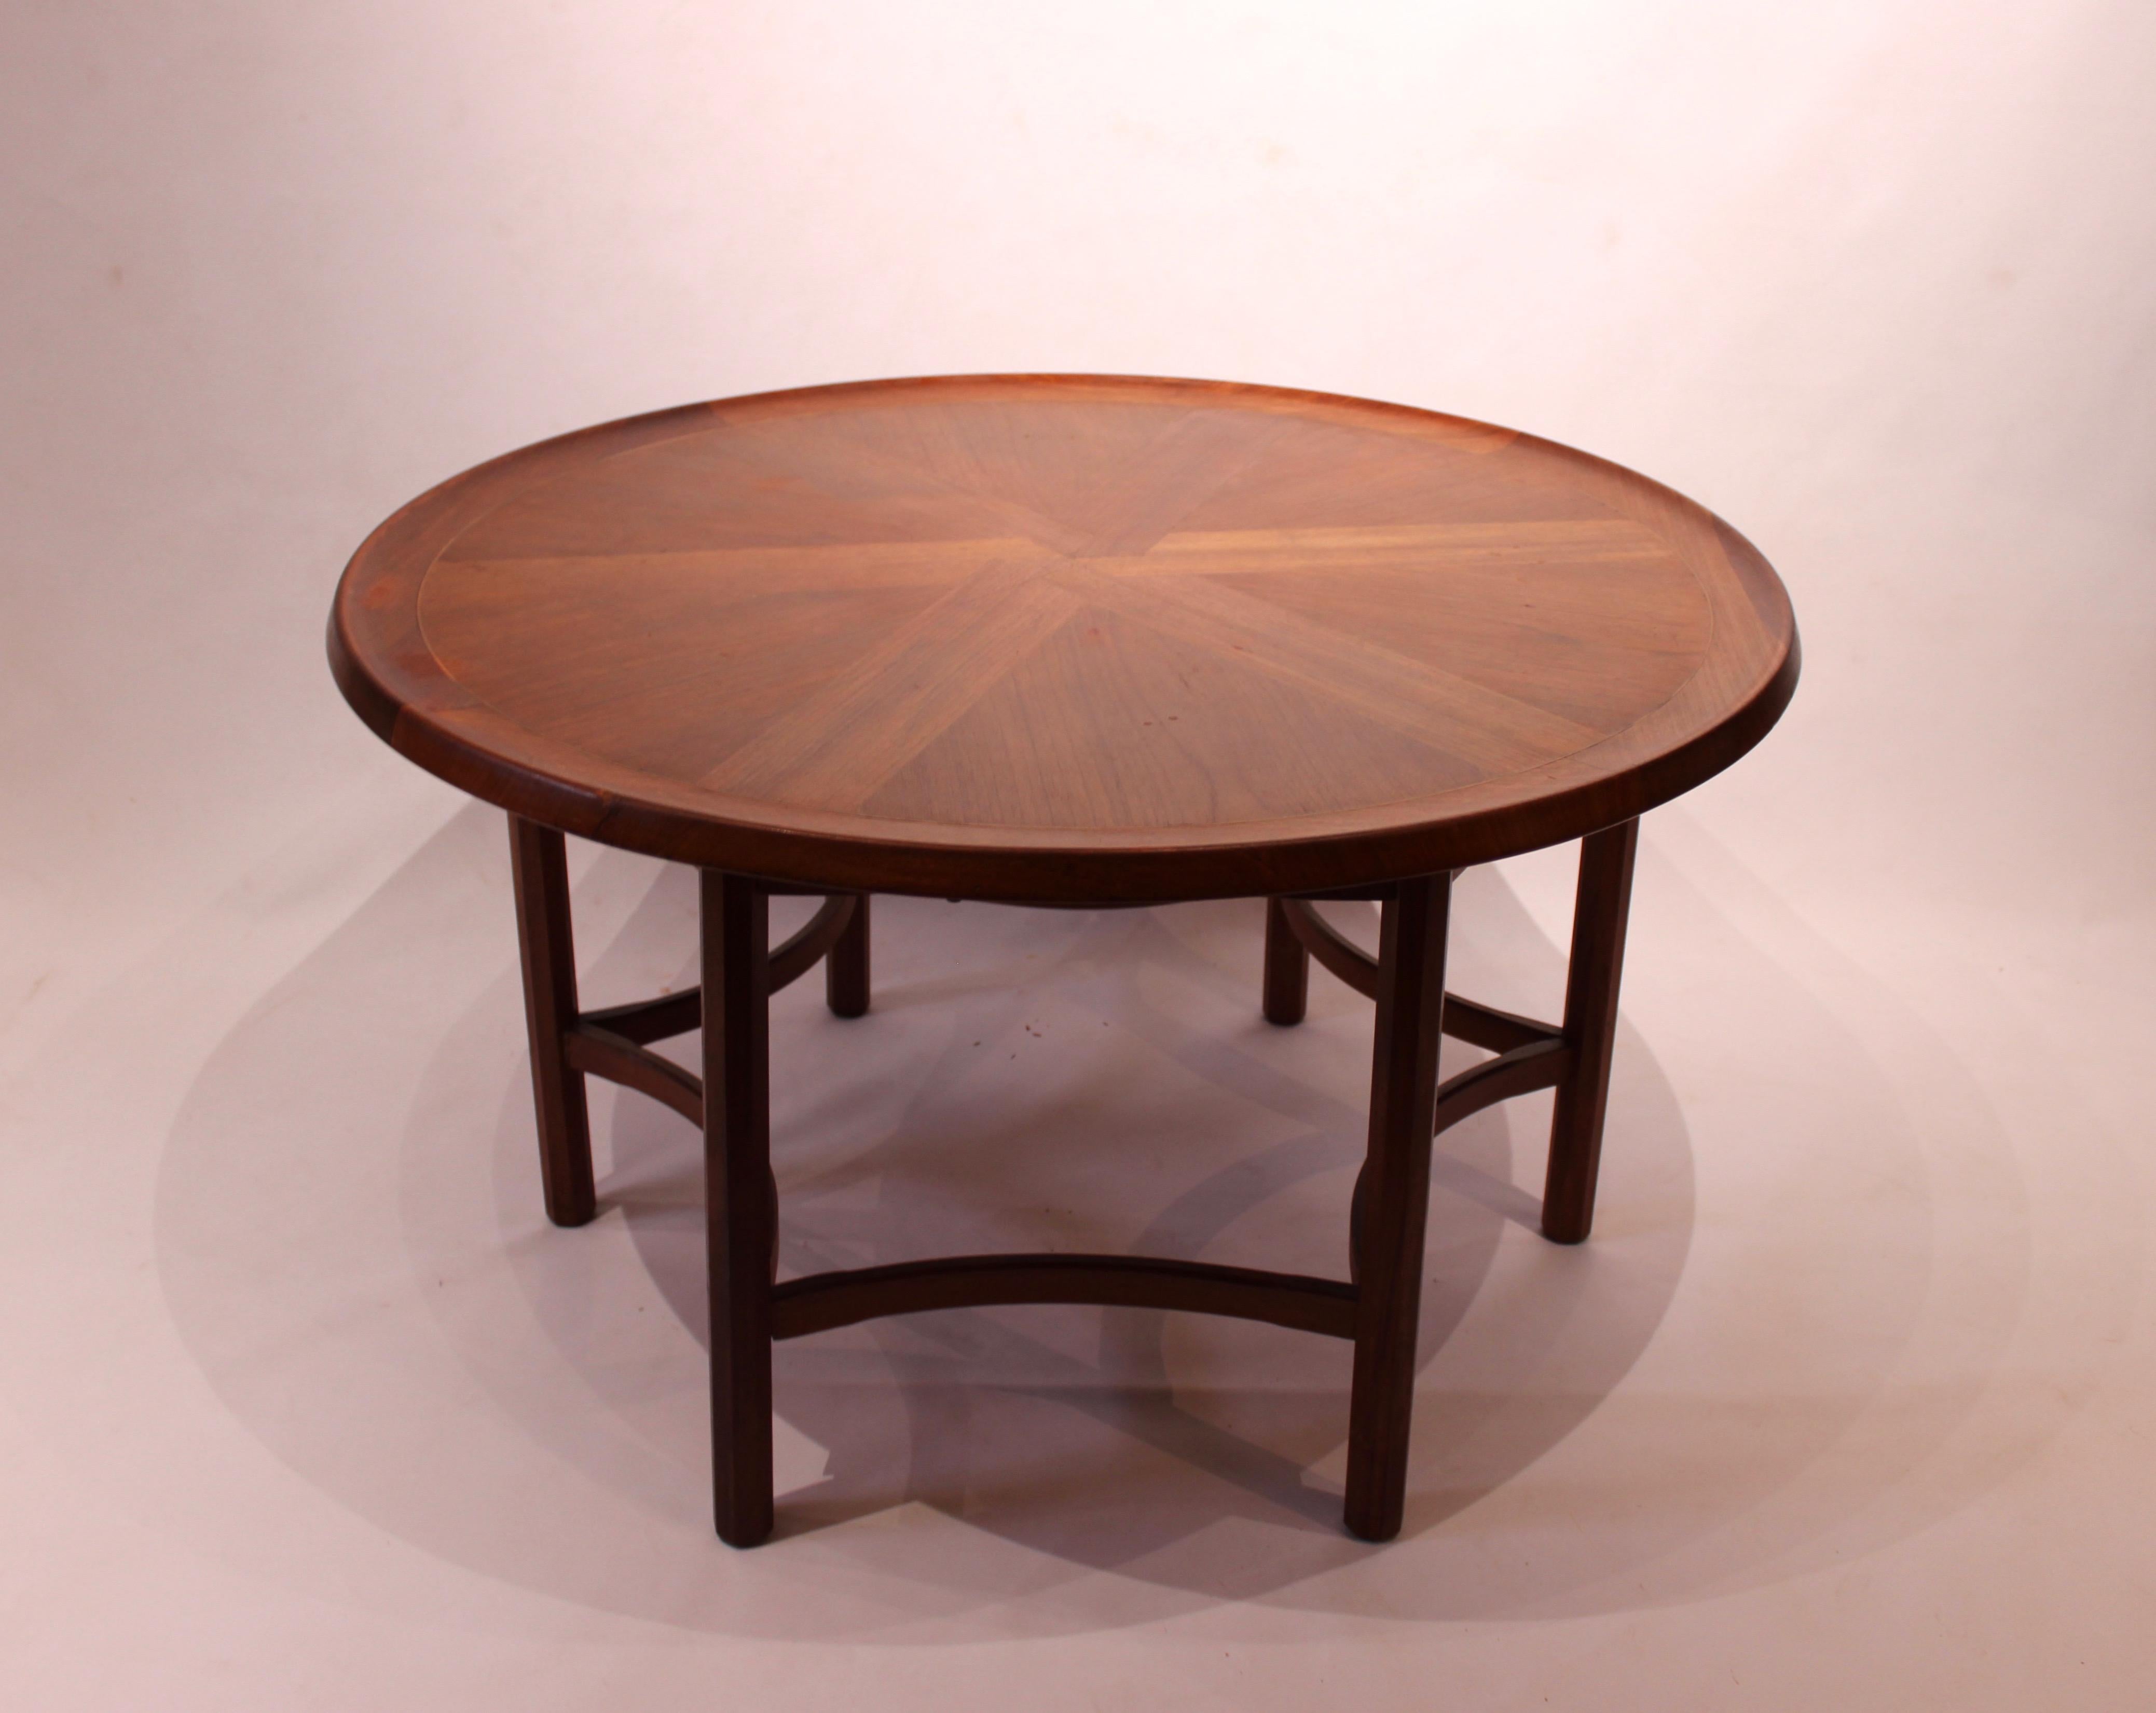 Round coffee table in teak of Danish design from the 1960s. The tabletop can be removed and the table is of great vintage condition.